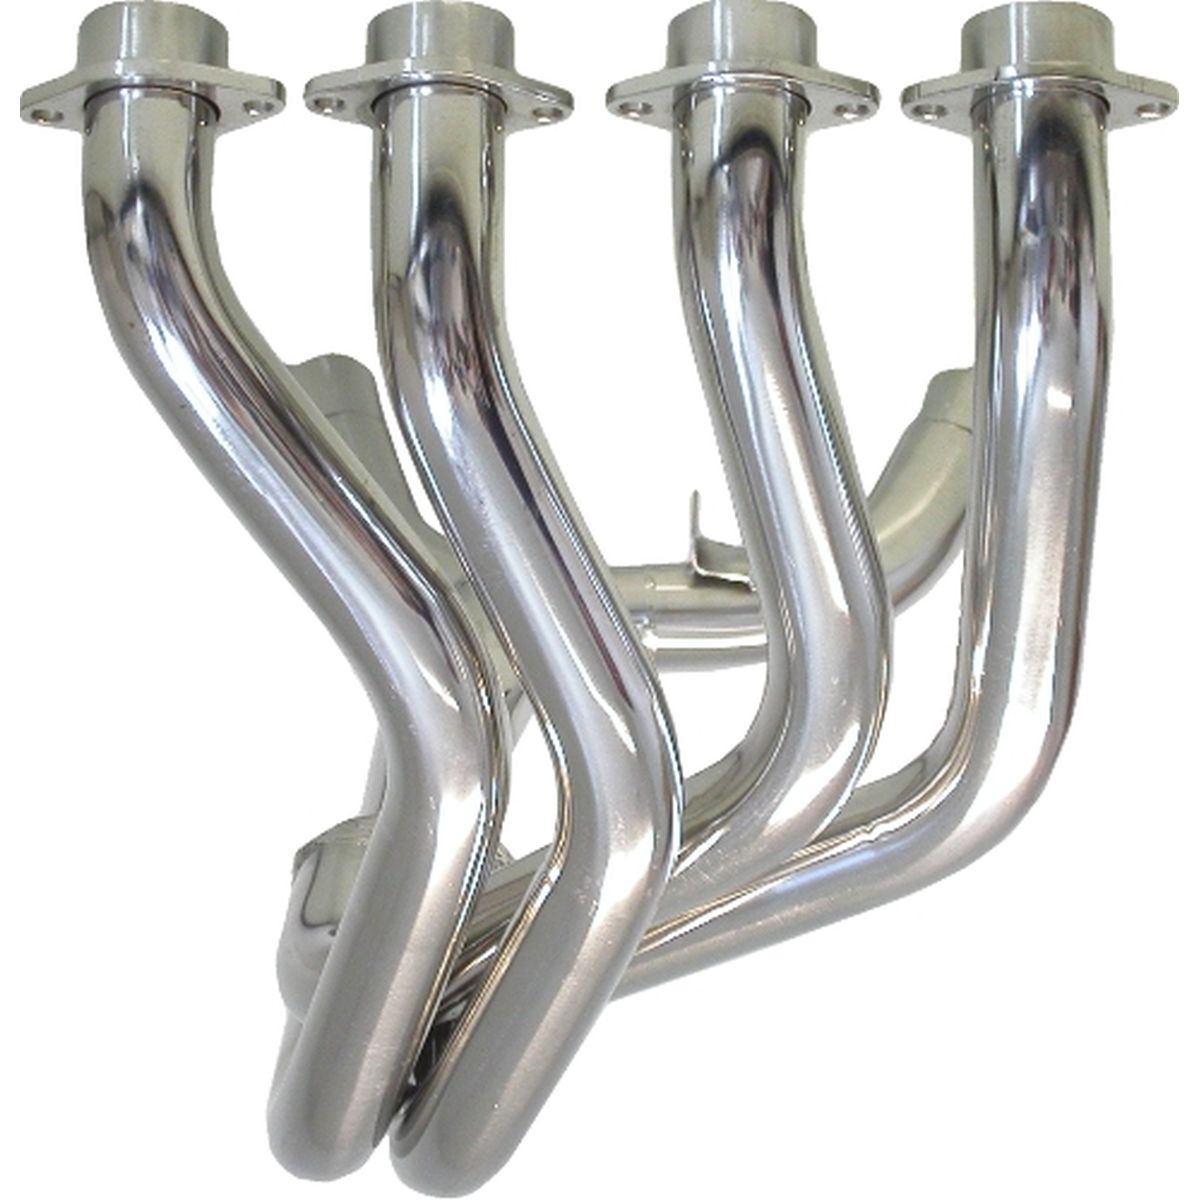 AW Motorcycle Parts. Exhaust Down Pipes Stainless Honda CBR1100X 96-98 Carb